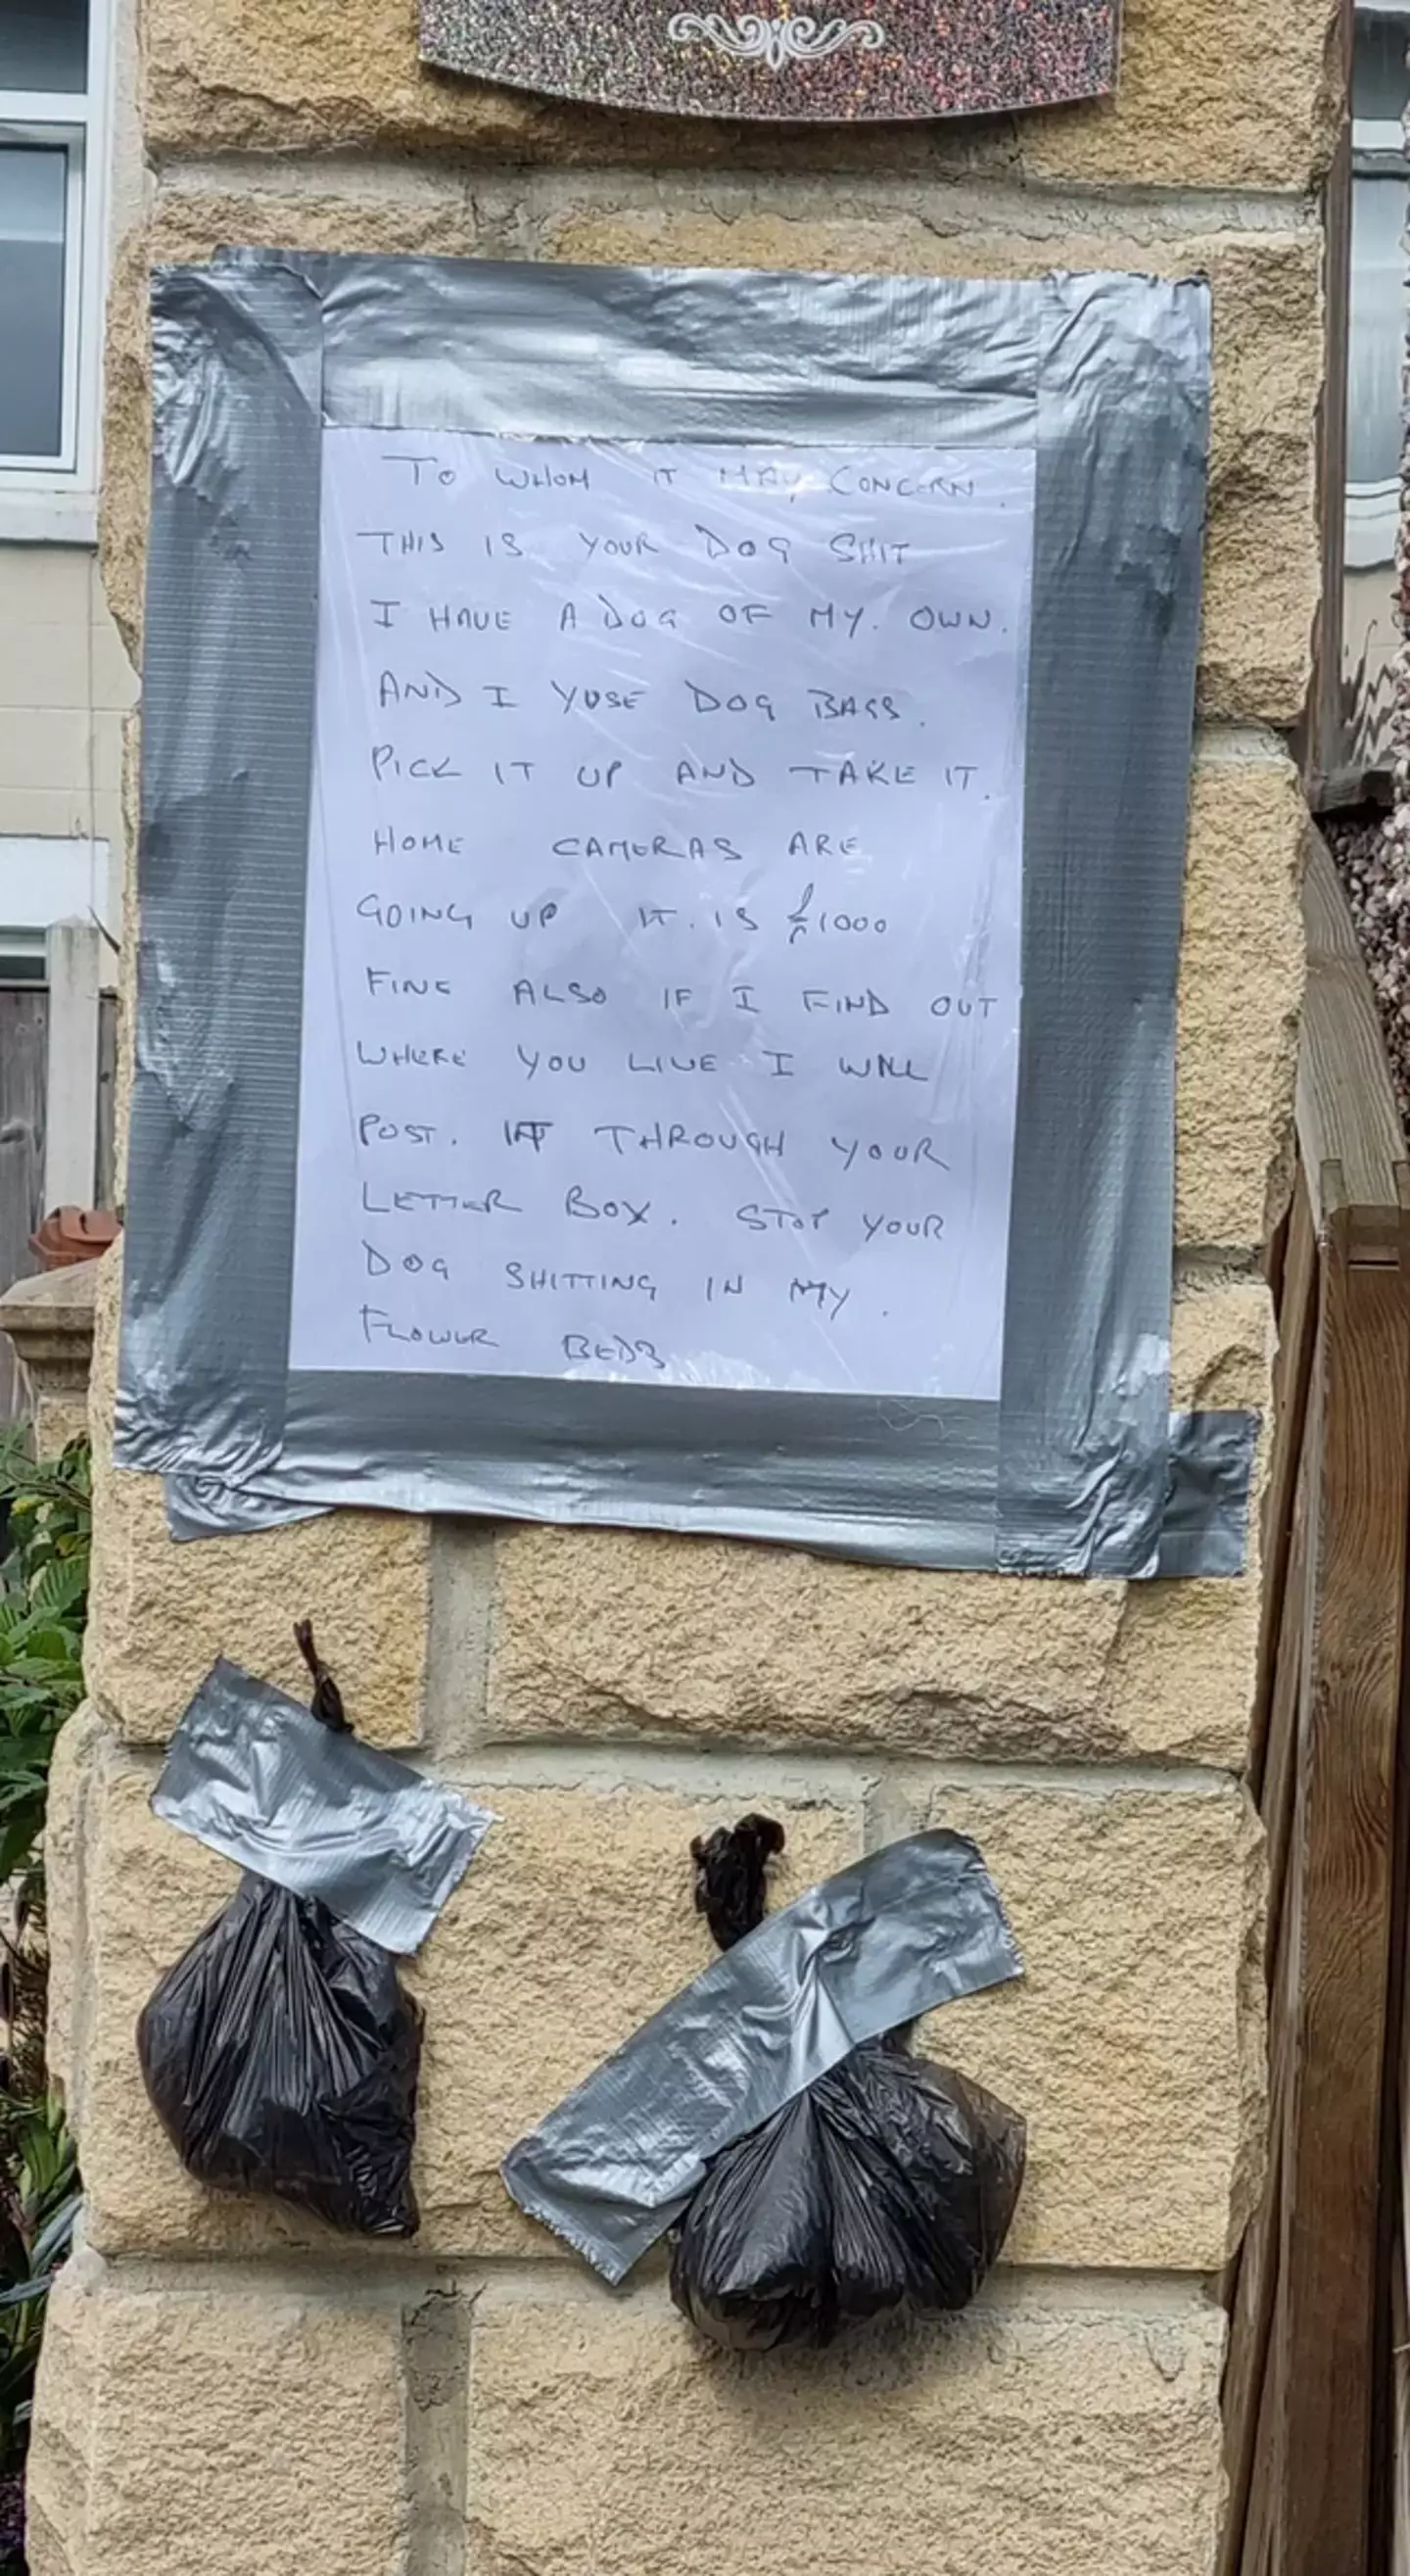 The angry note was shared on Reddit.